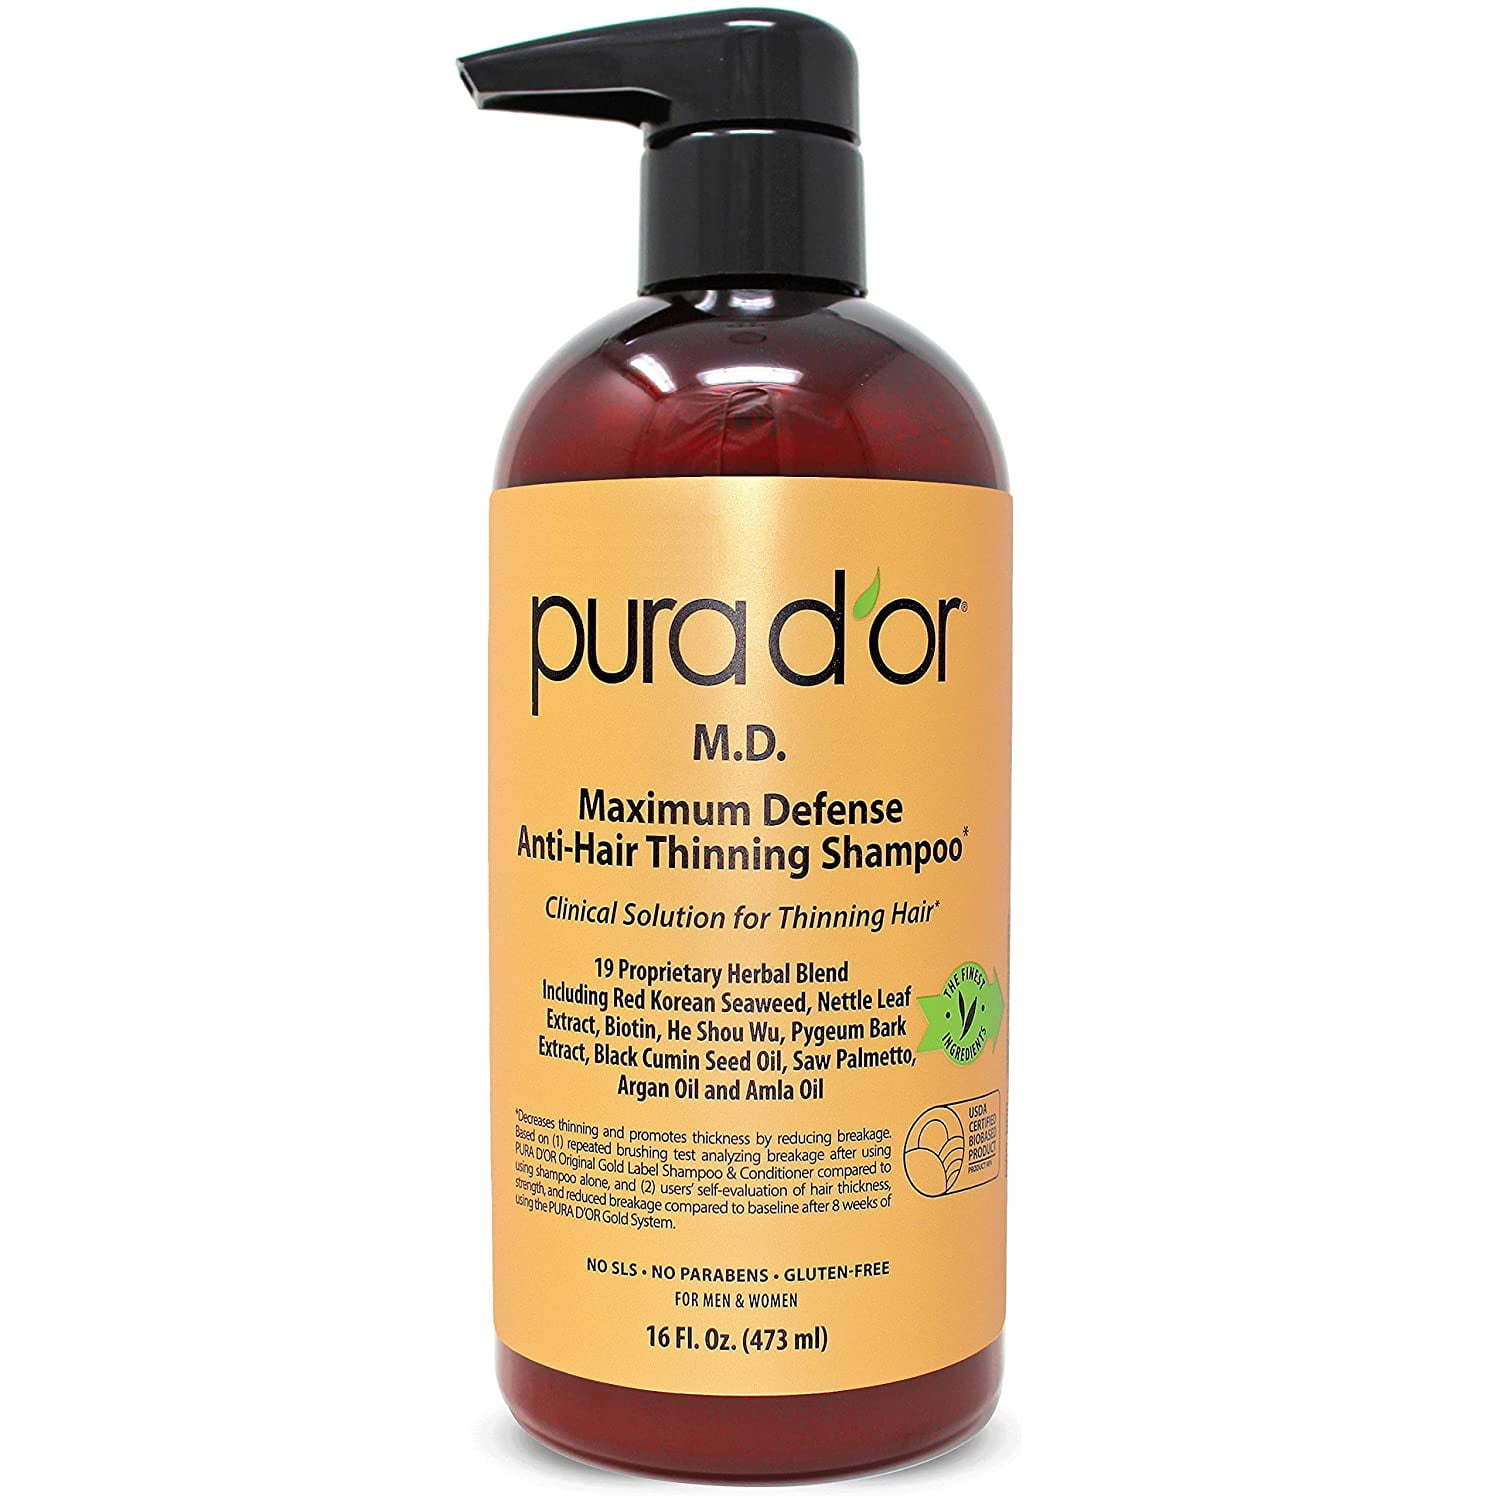 PURA D'OR Original Gold Label Anti-Thinning Biotin Shampoo, CLINICALLY  TESTED Proven Results, Herbal DHT Blocker Hair Thickening Products For  Women & Men, Natural Shampoo For Color Treated Hair, 16oz 